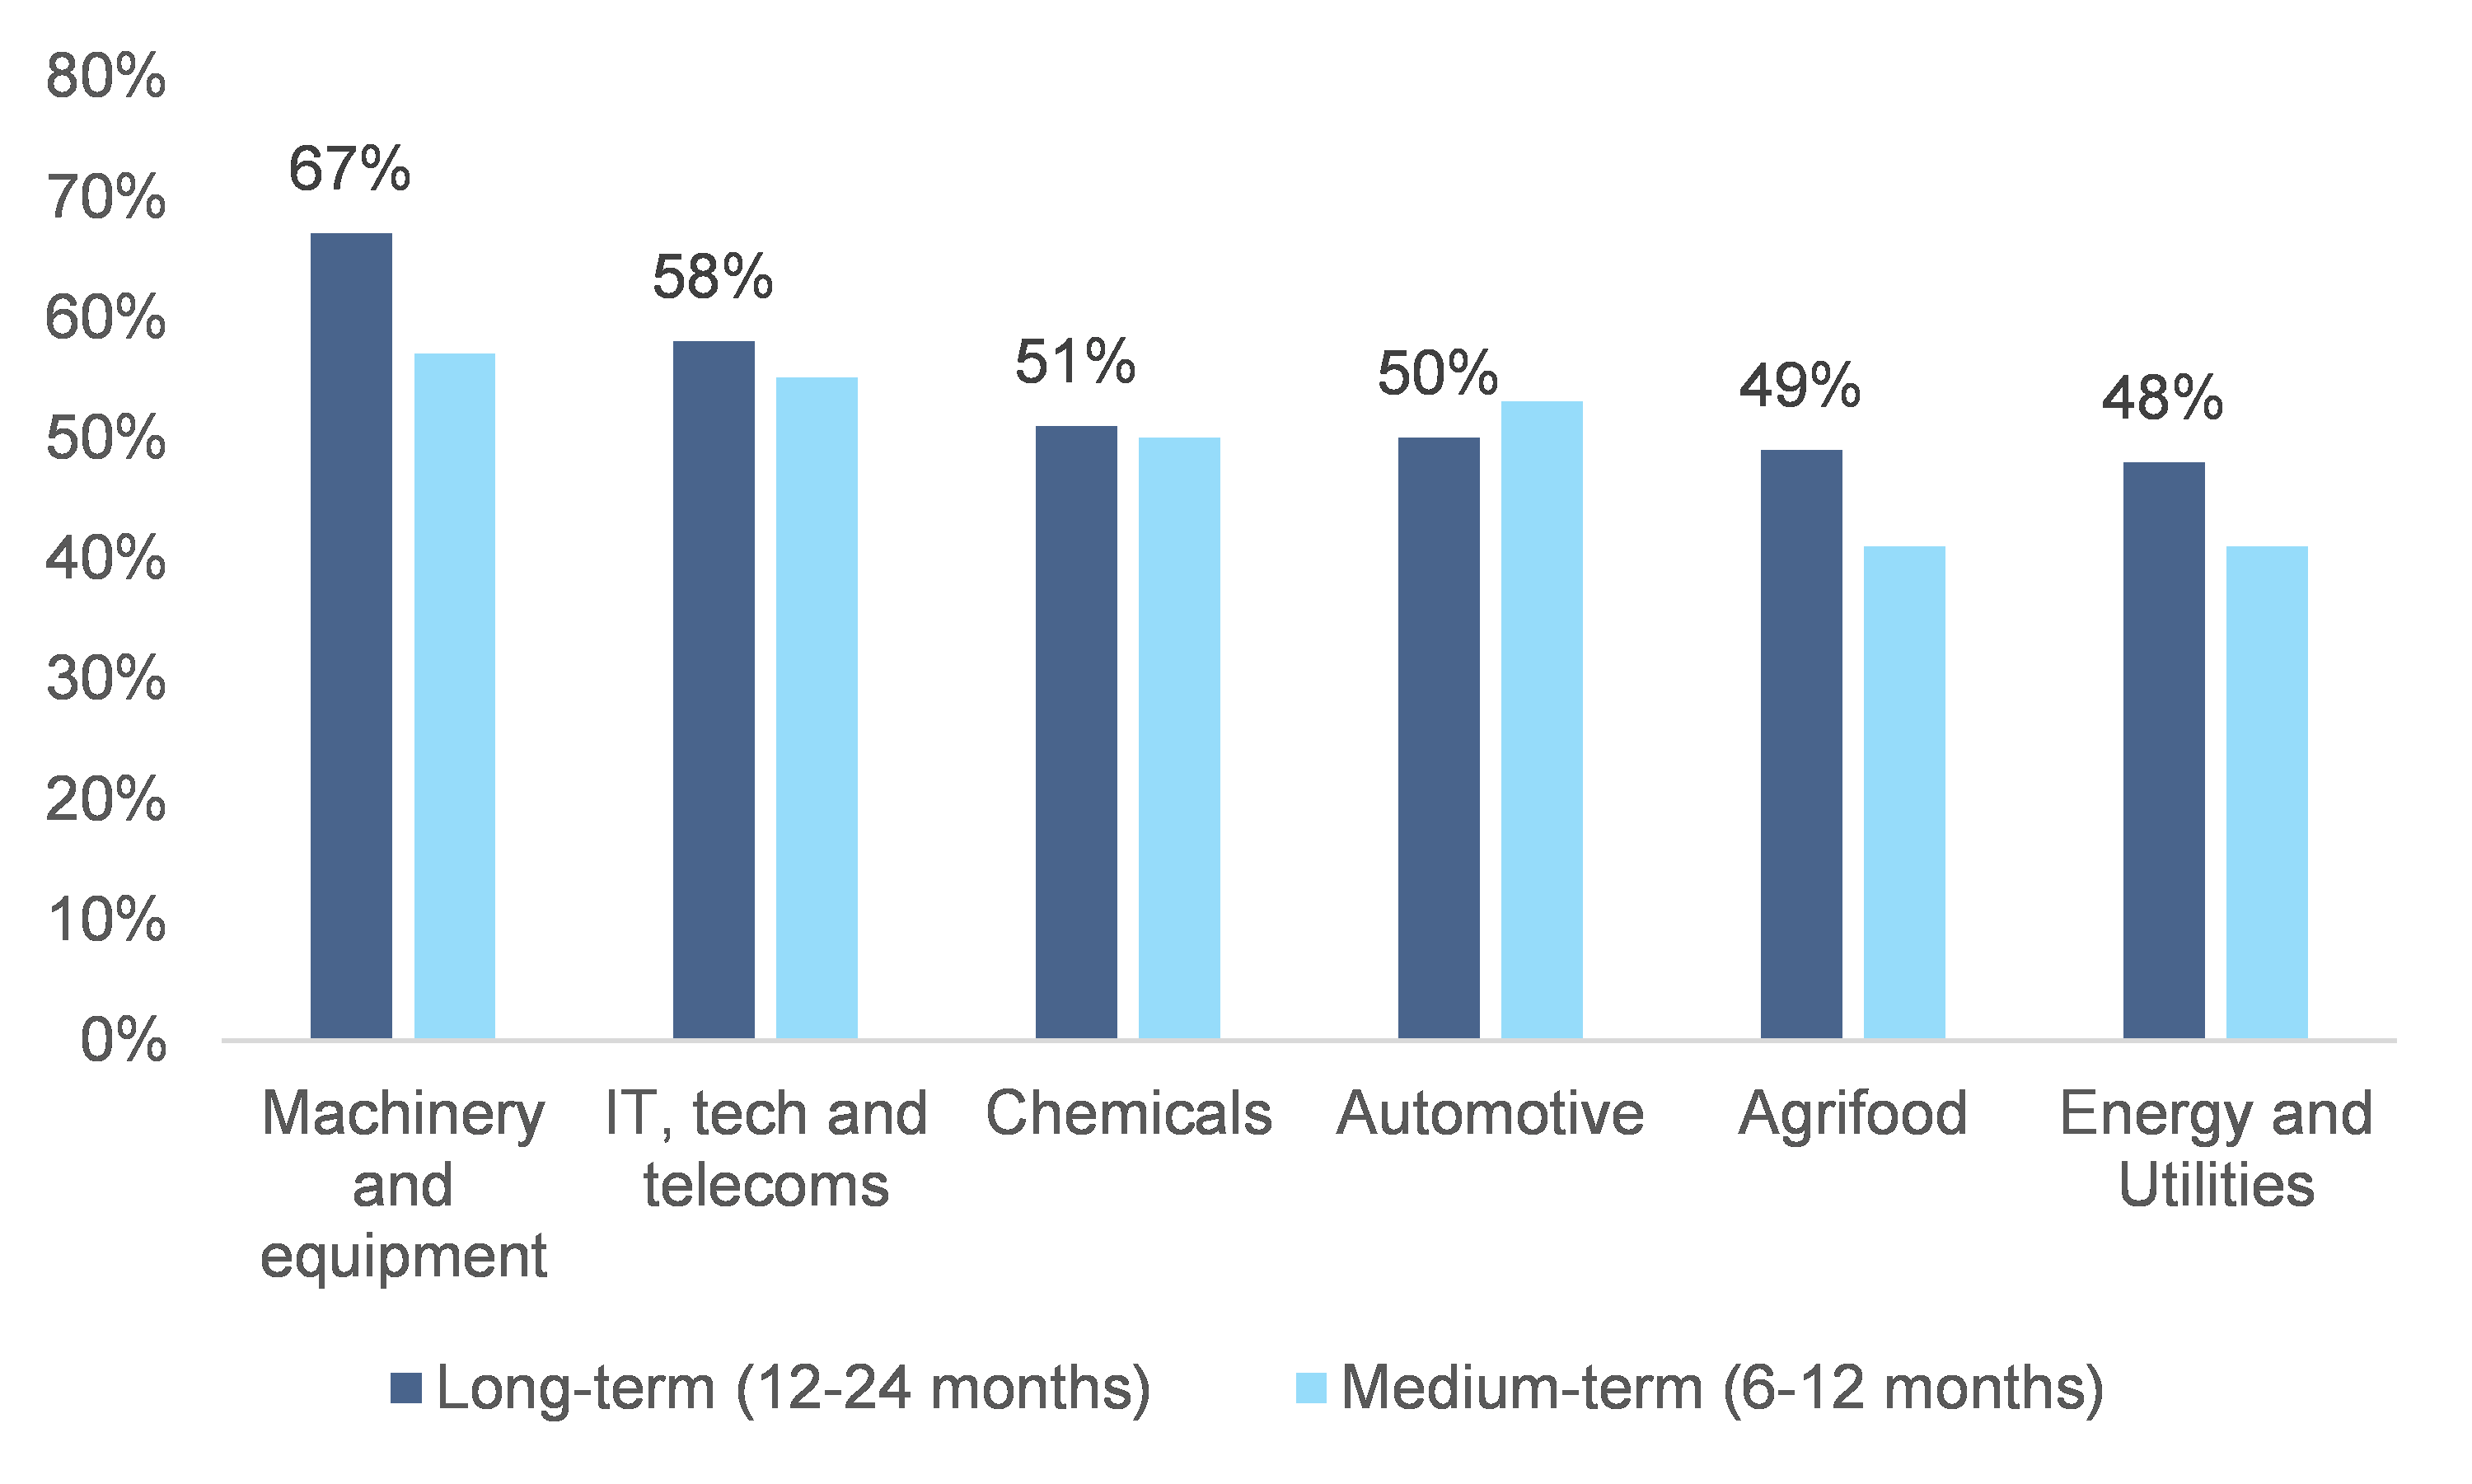 Figure 7: Share of respondents considering moving their production, by sectors (no destination specified)